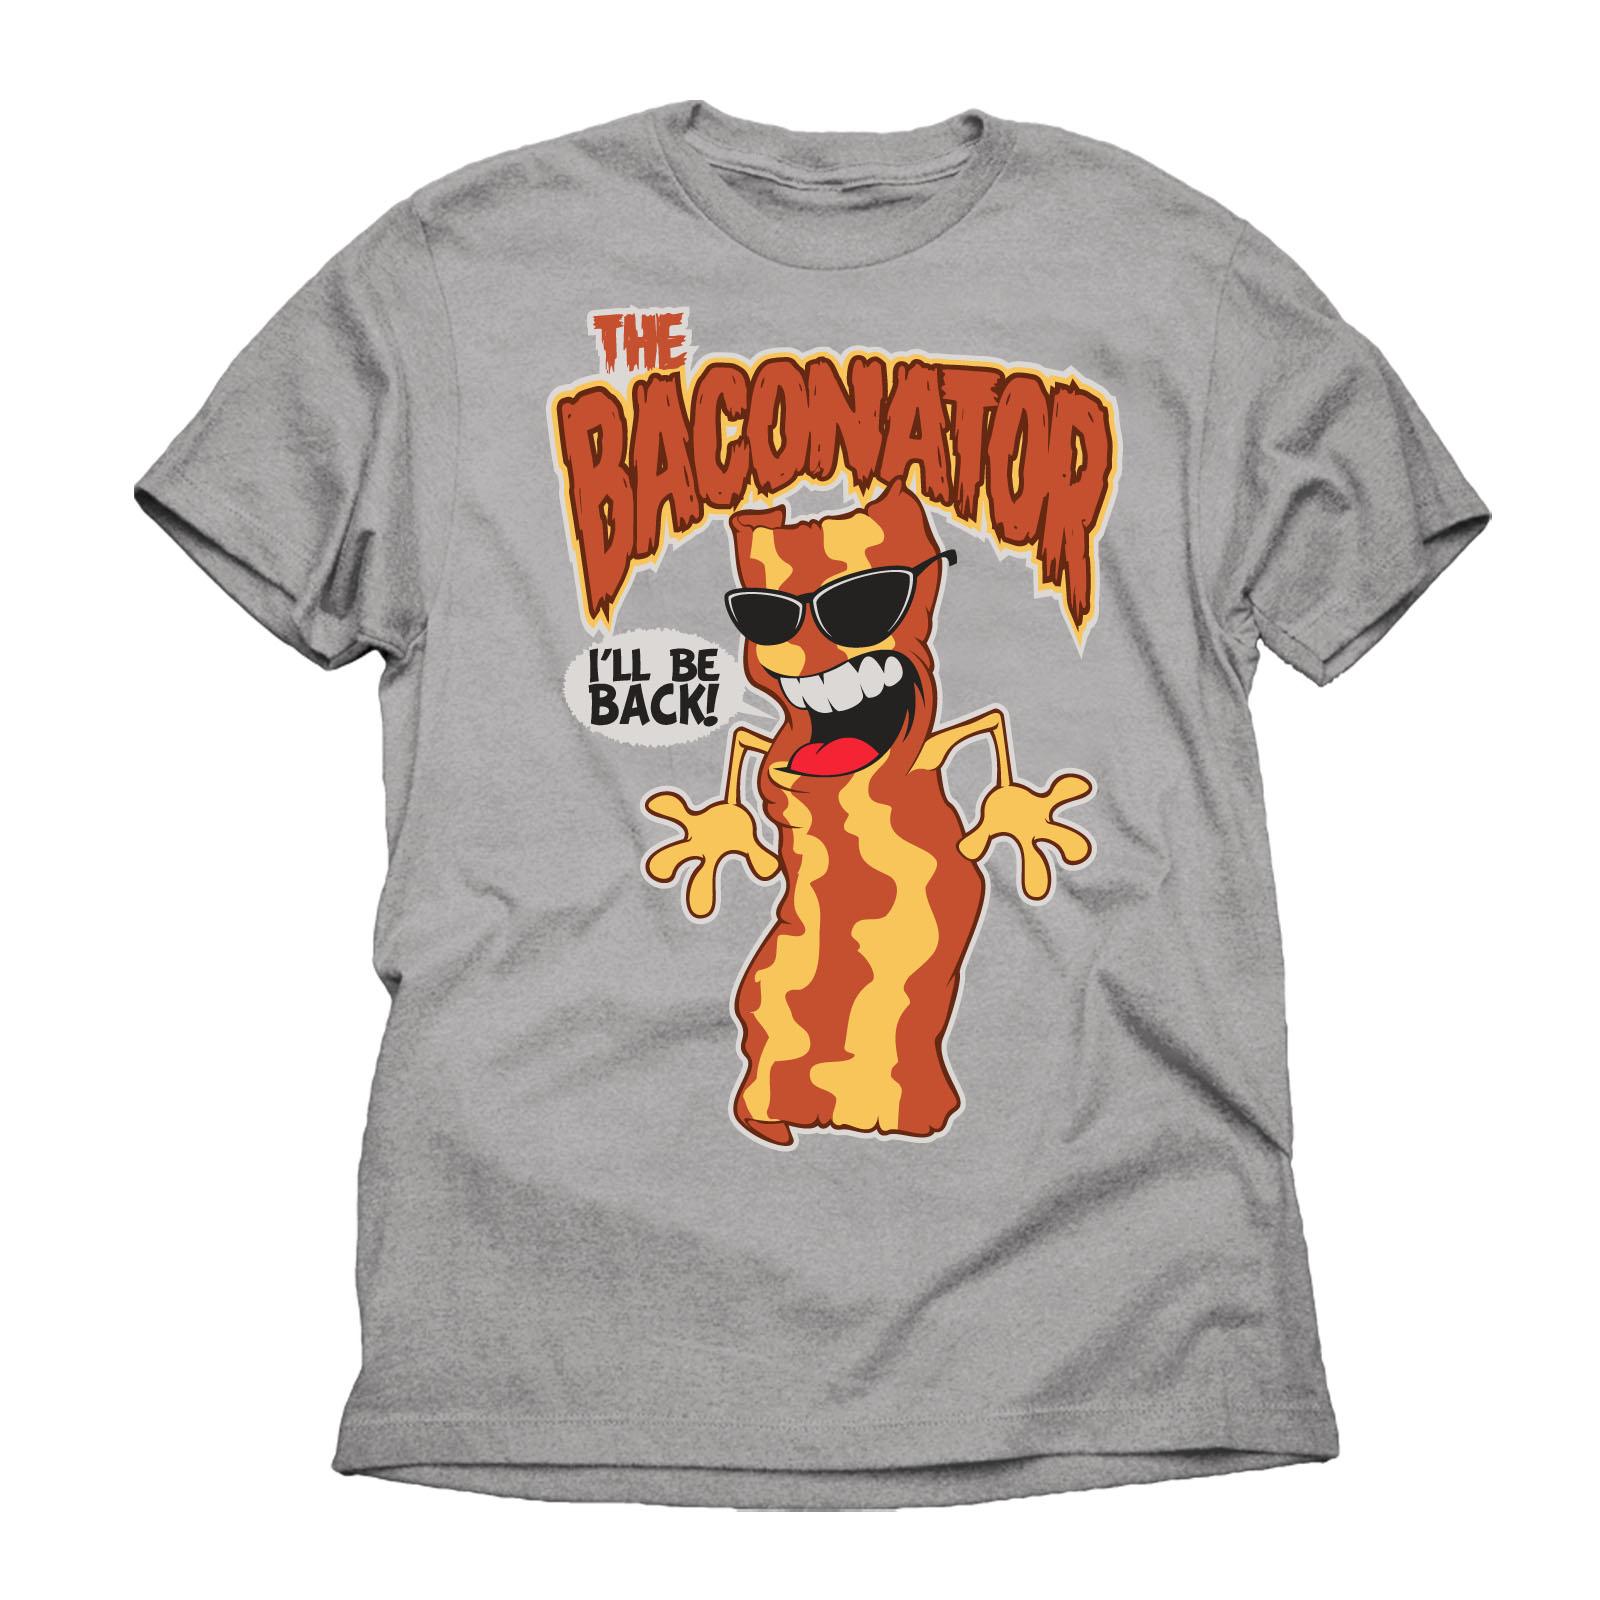 Route 66 Boy's Graphic T-Shirt - The Baconator